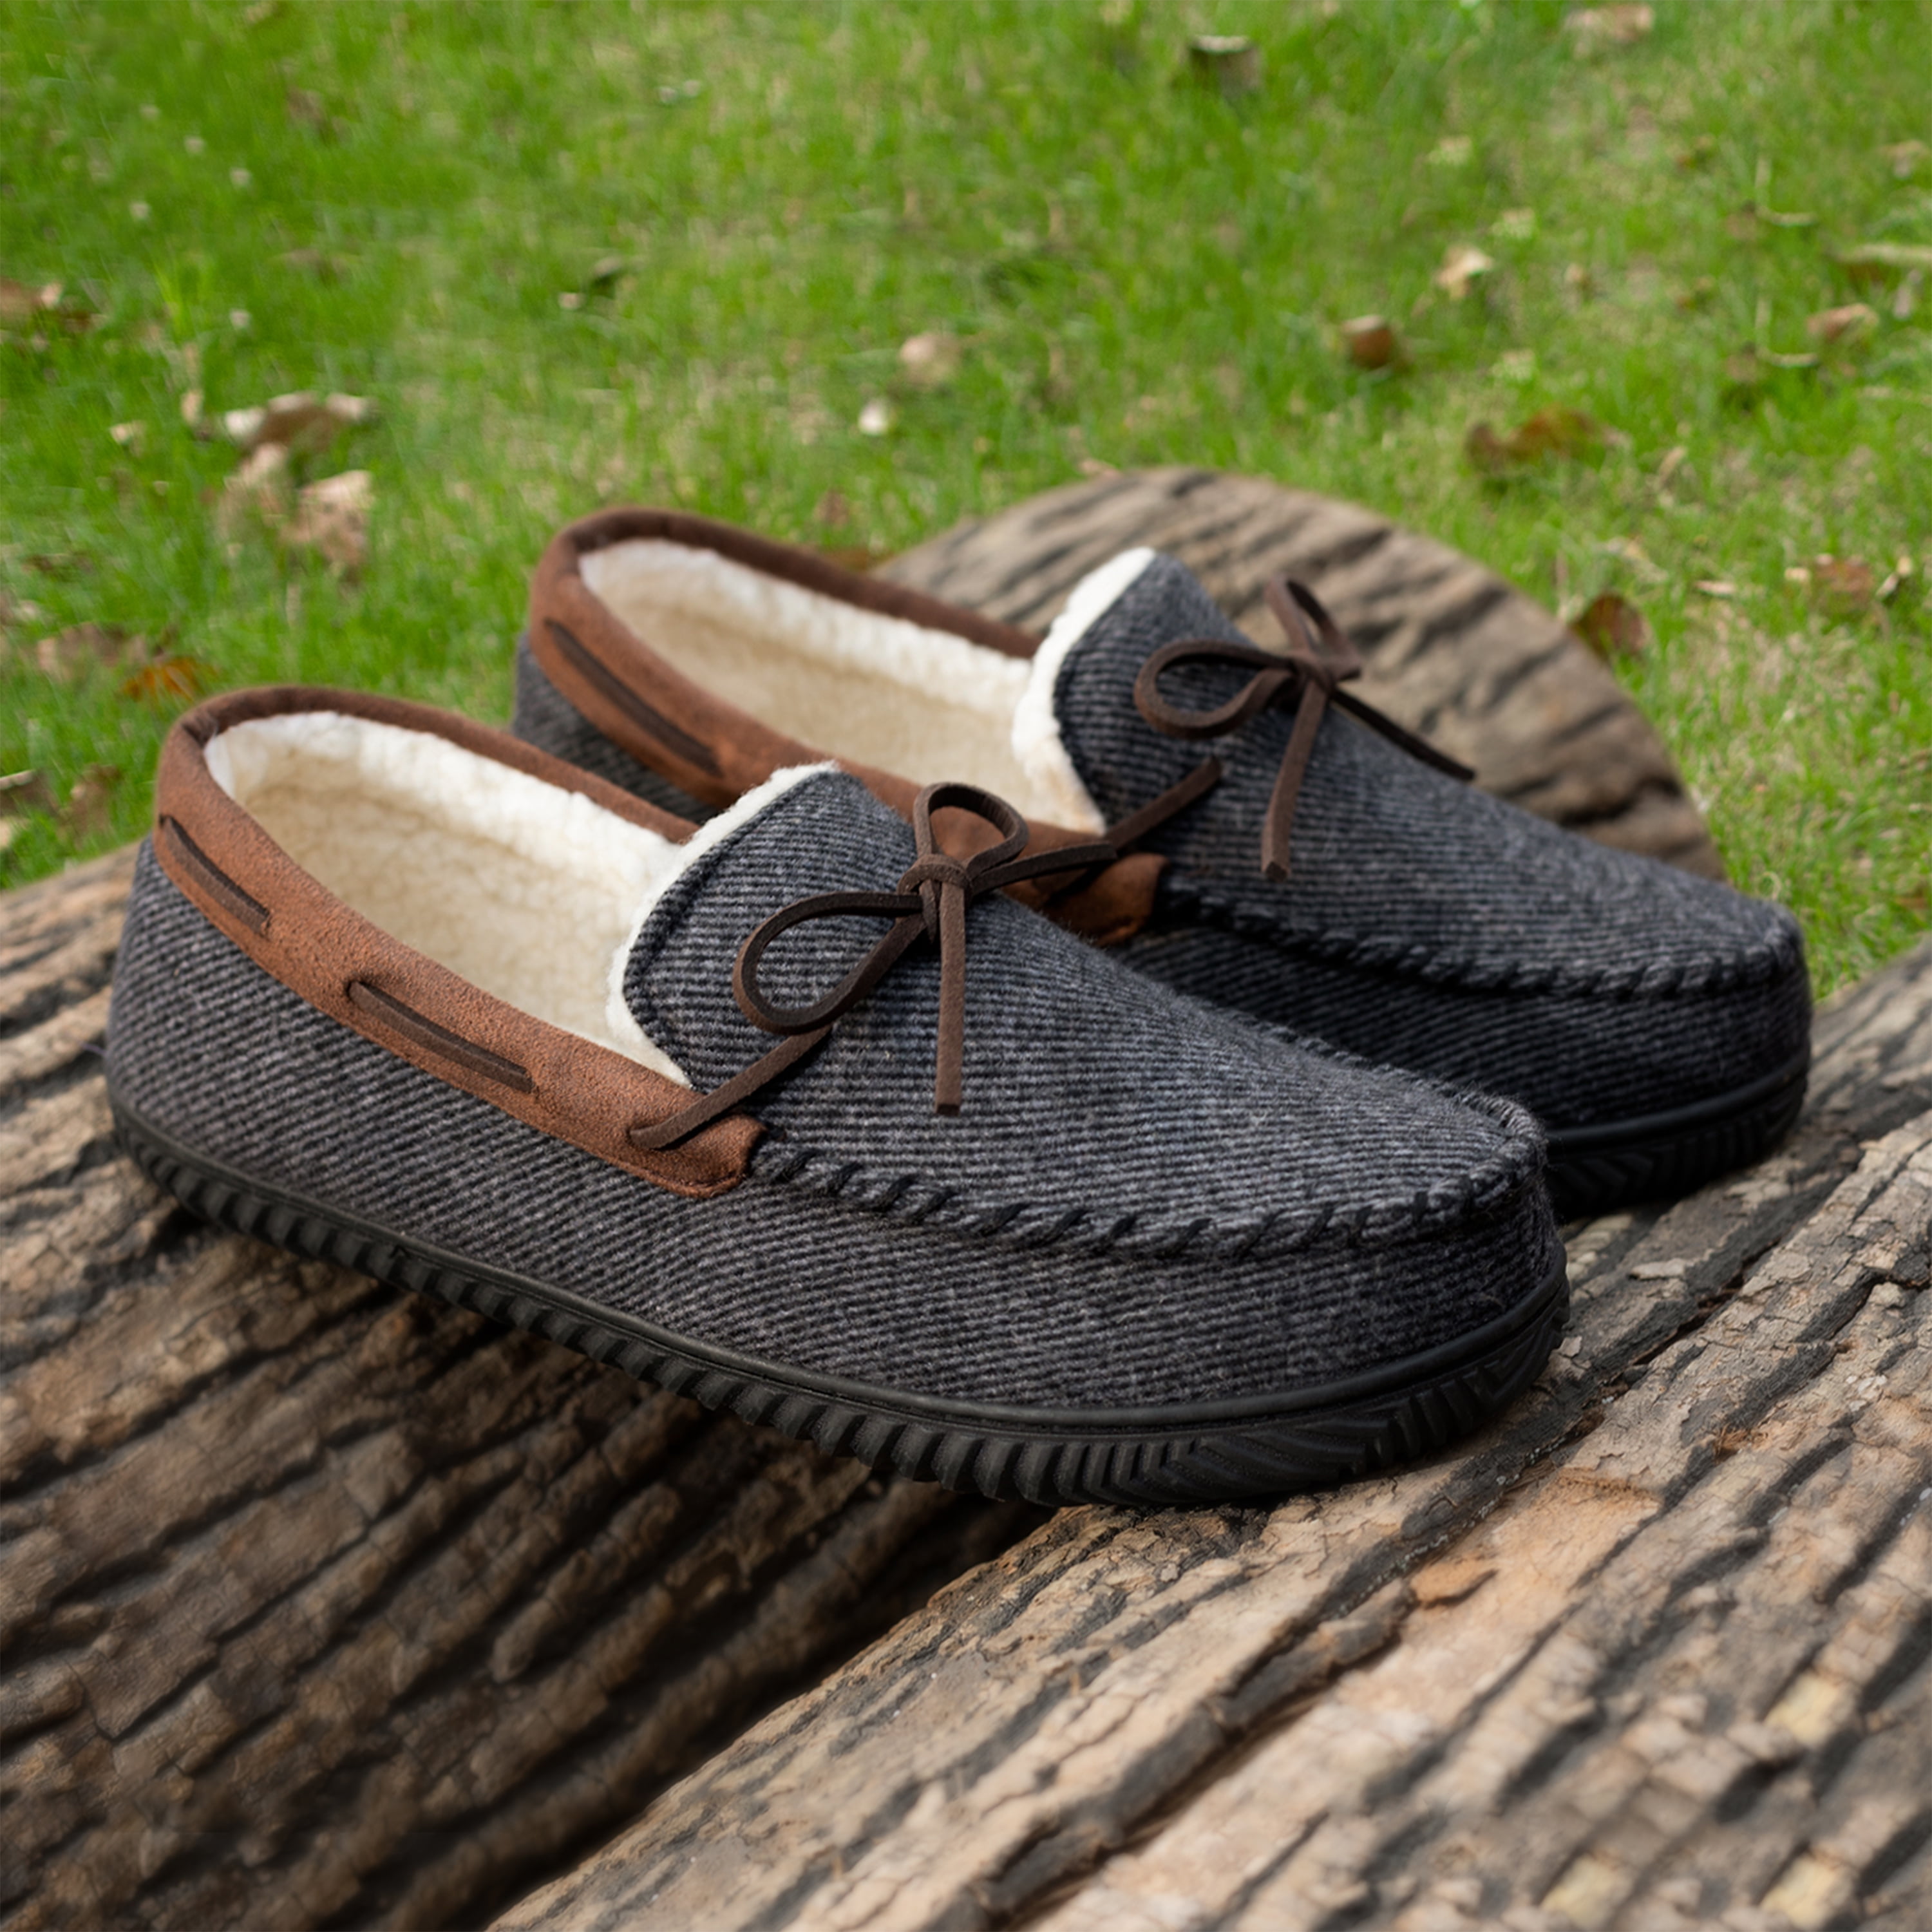 Lined slippers by Tom Tailor